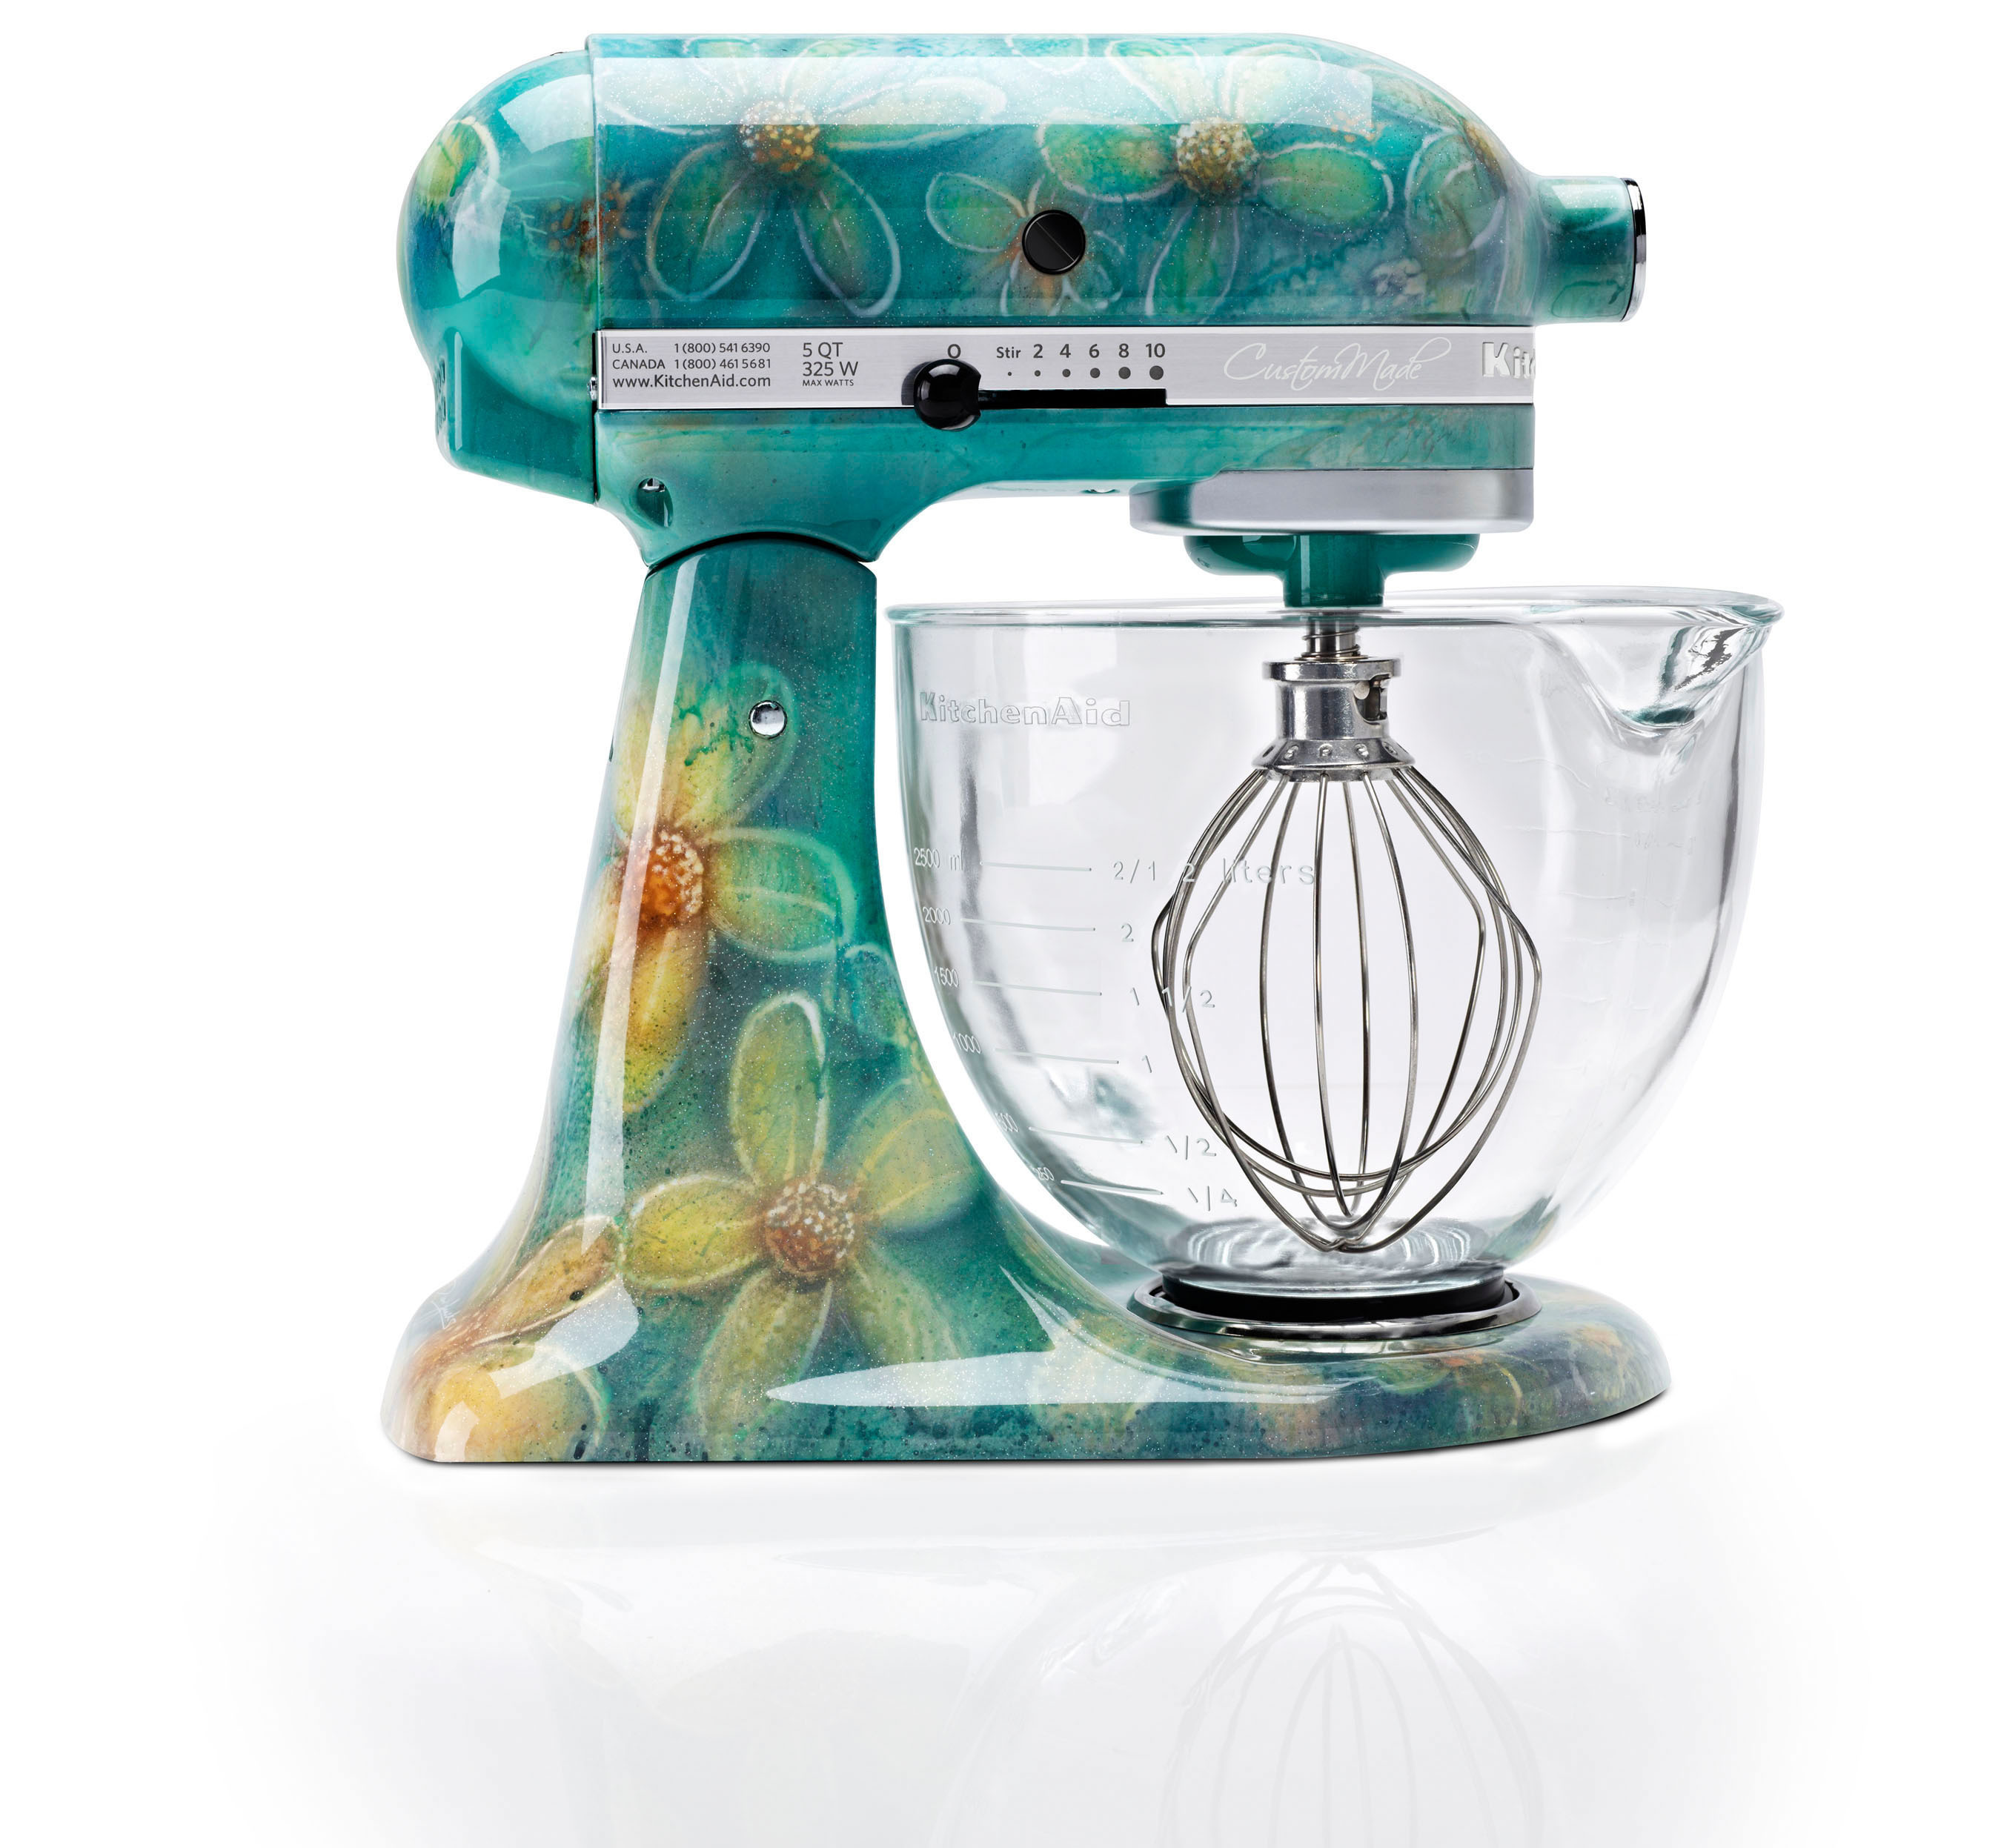 Manifold transfusion væg KitchenAid Marks Holidays with Limited-Edition, Hand-Painted Stand Mixers